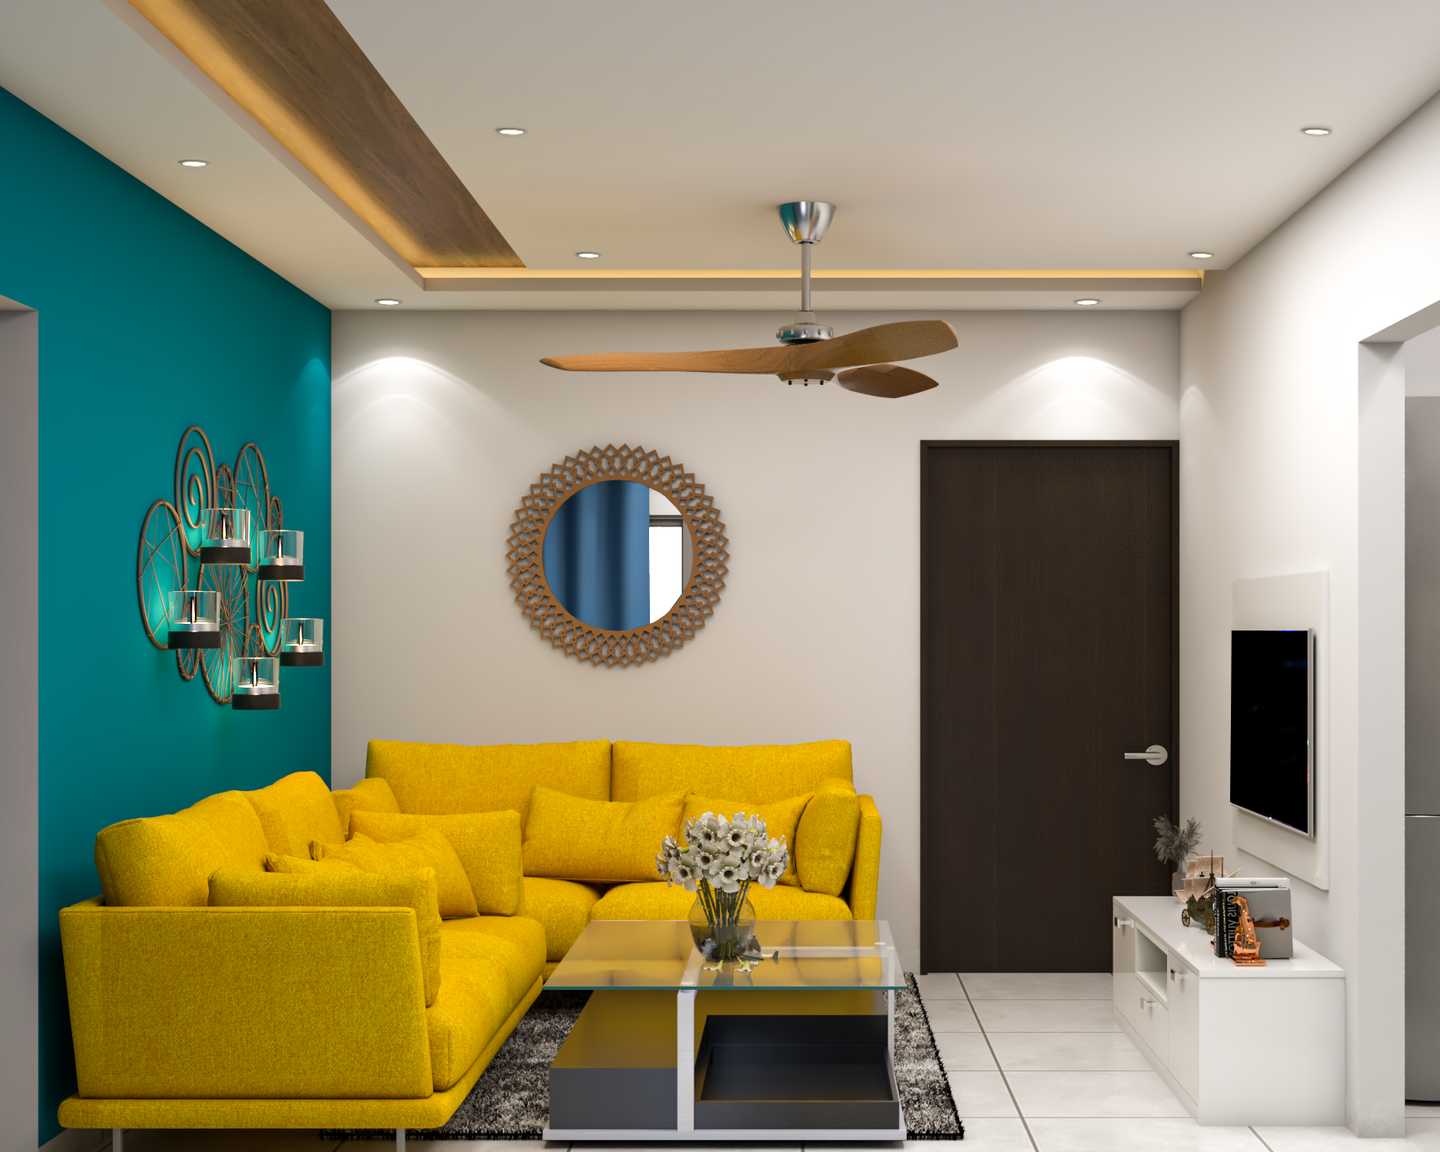 Living Room In Yellow And Teal Accent Wall - Livspace